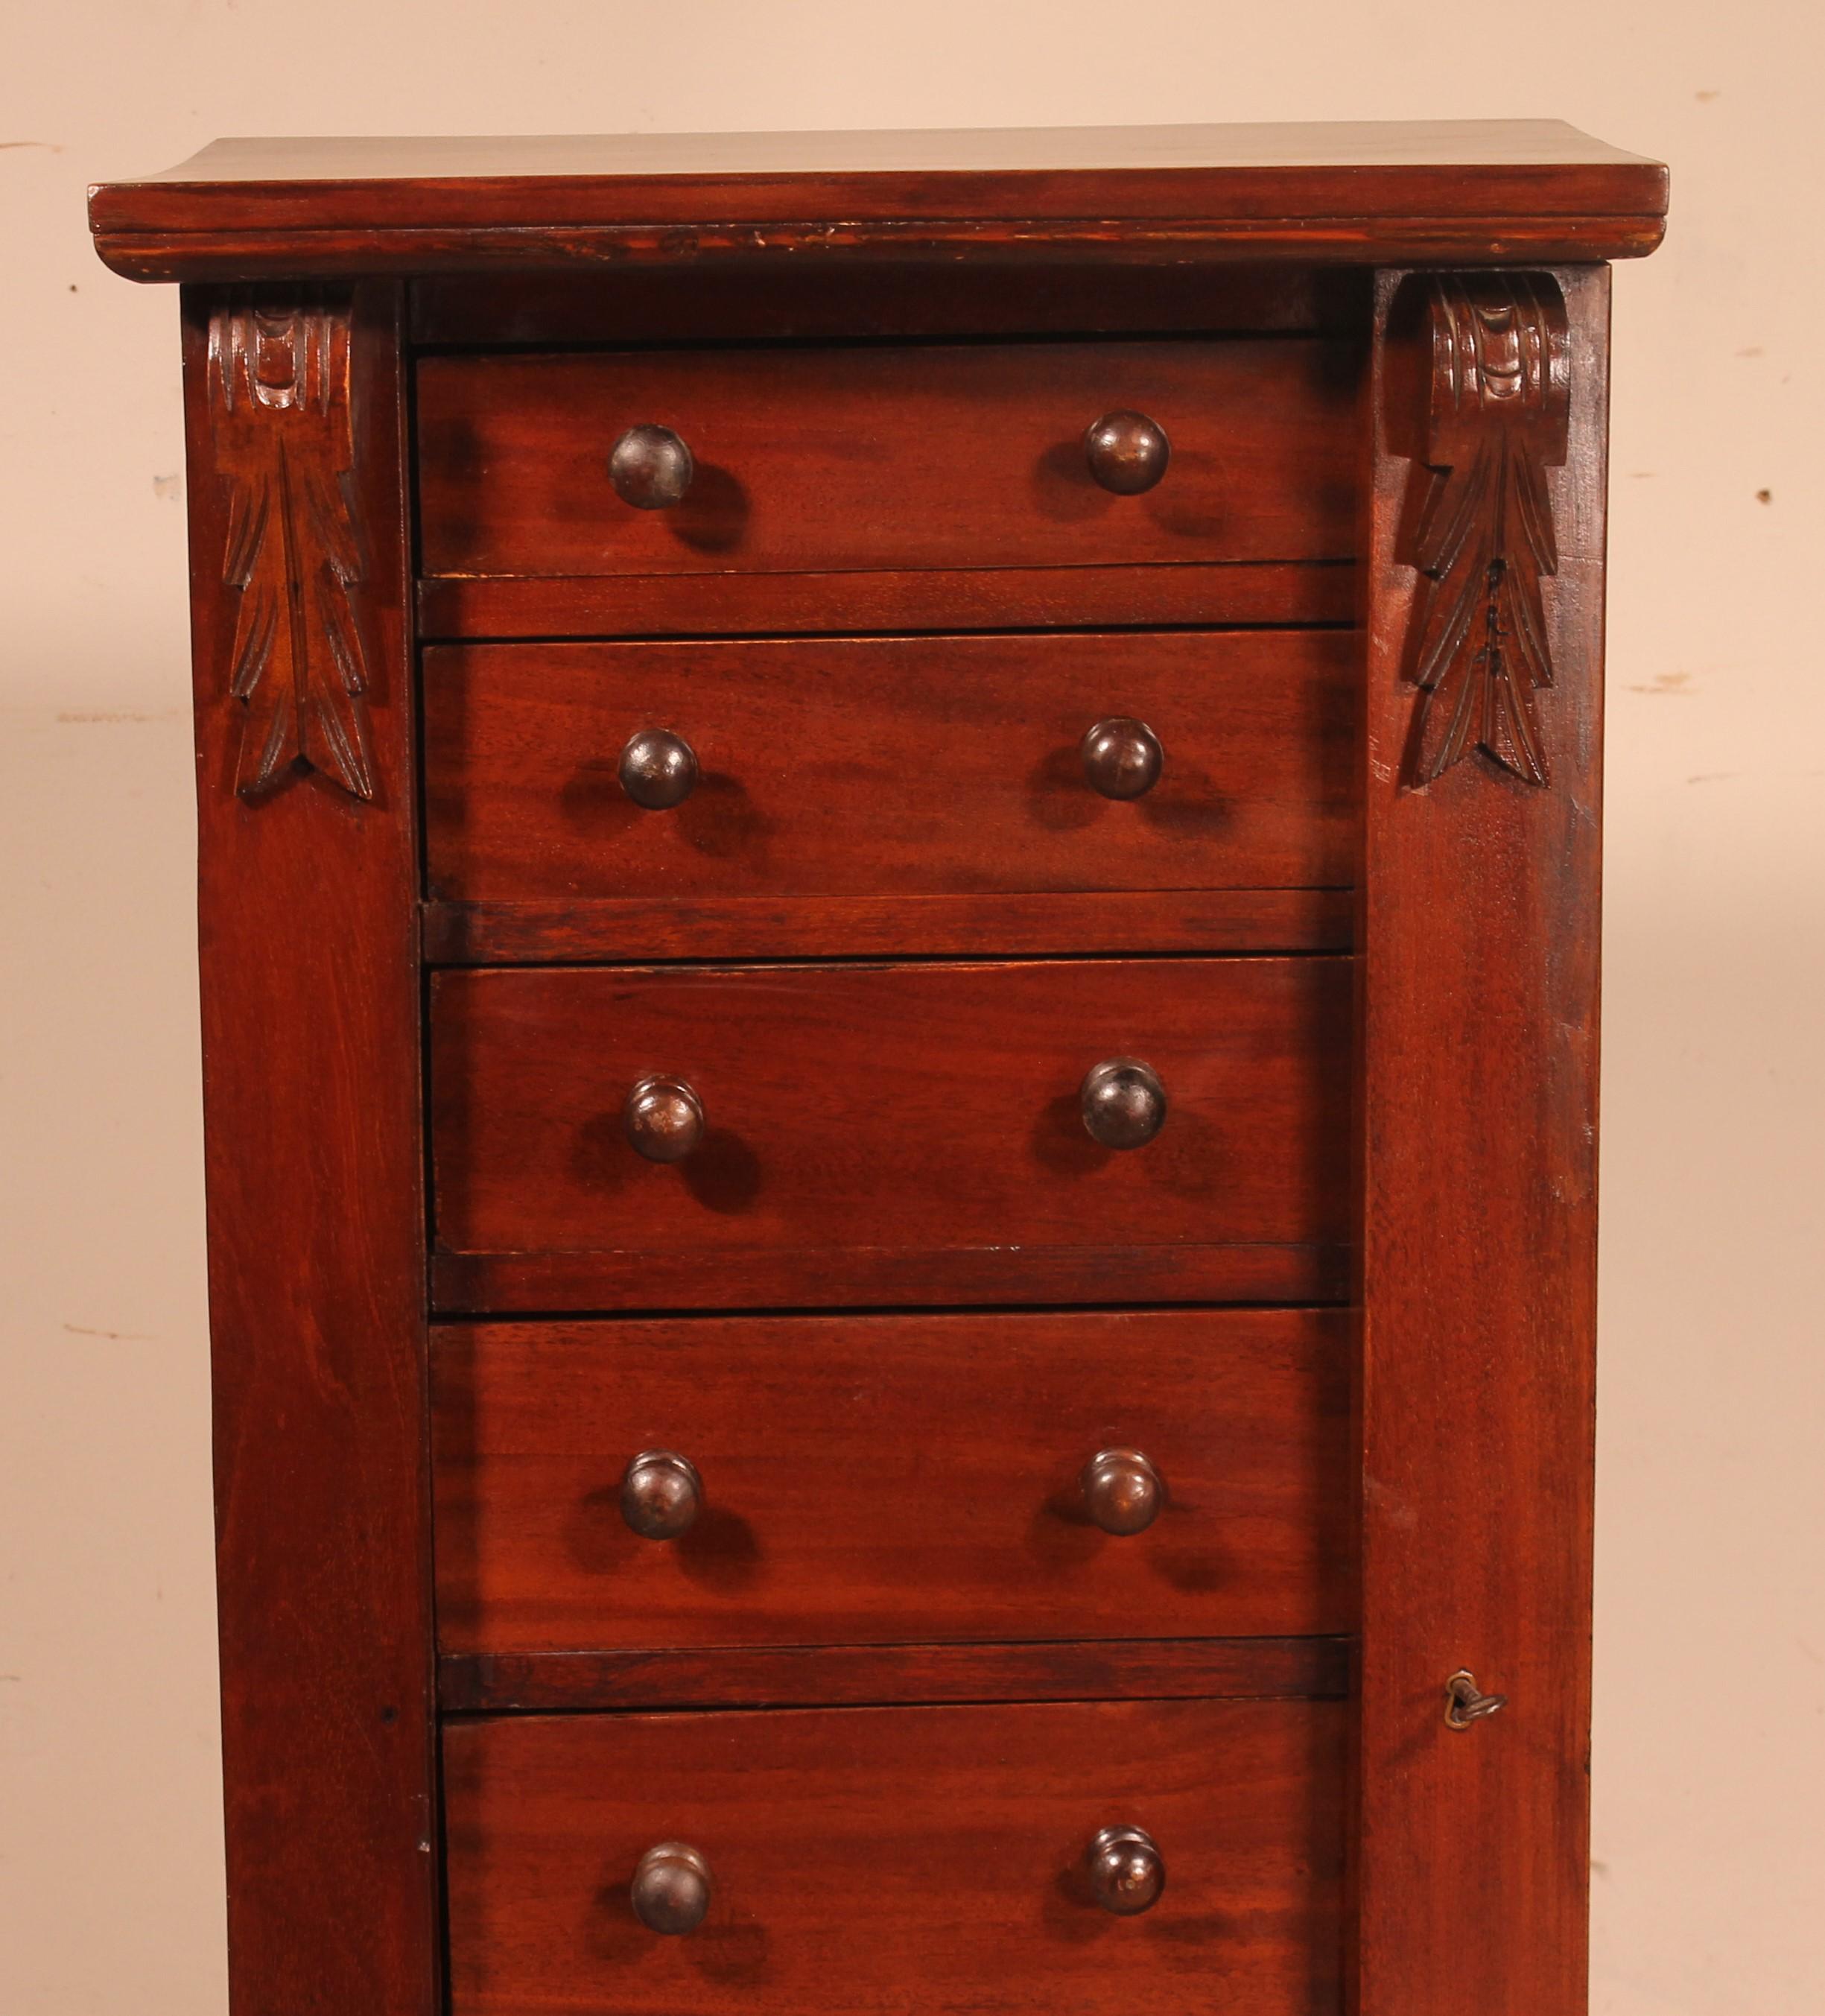 lovely little mahogany semainier called wellington chest from the 19th century
Very nice small piece of furniture which has 7 drawers (corresponding to the 7 days of the week)
It has a movable upright which allows the drawers to be locked with a